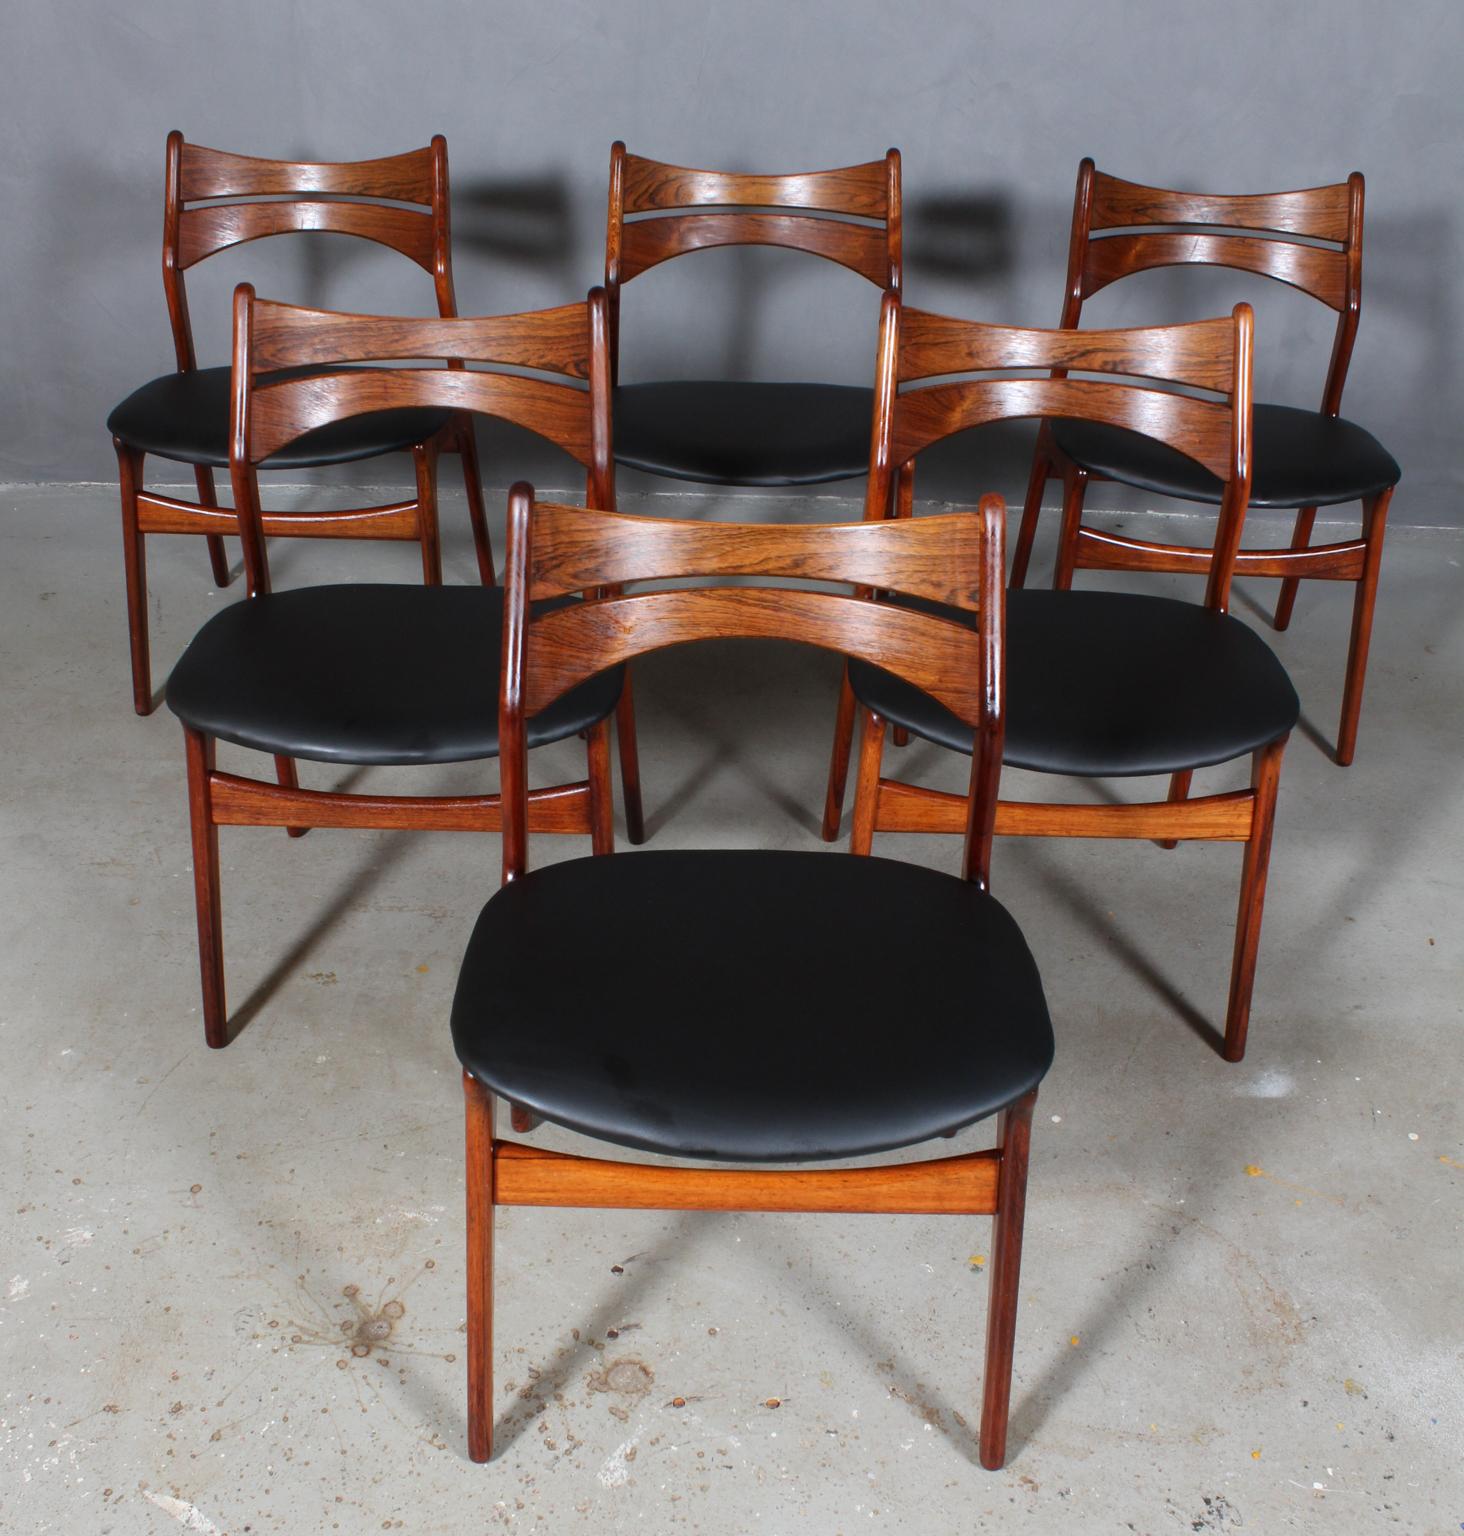 Five Eric Buch chairs with frame of partly solid rosewood.

New upholstered with black semi aniline leather. 

Model 310, made by Chr Christensens Møbelfabrik, Denmark.